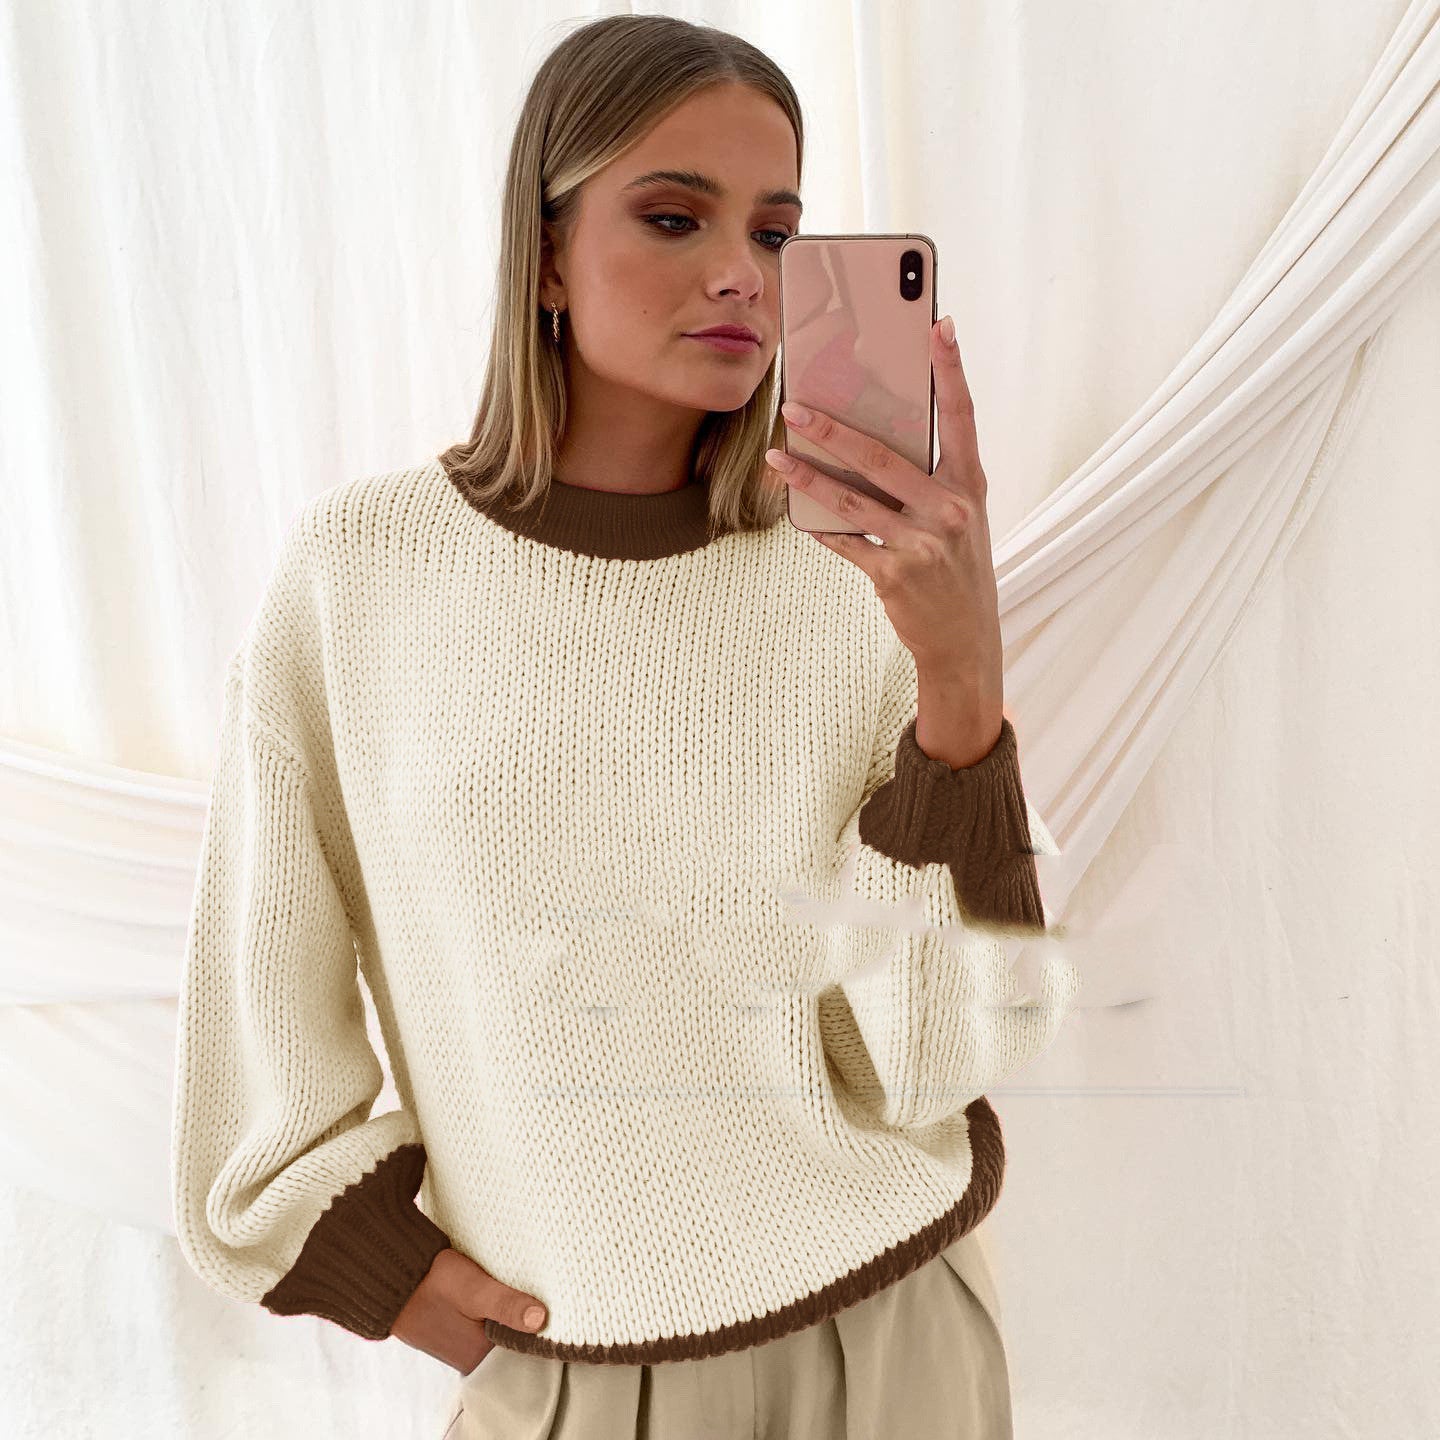 New Women's Knitted Sweater Stitched Pullover Loose